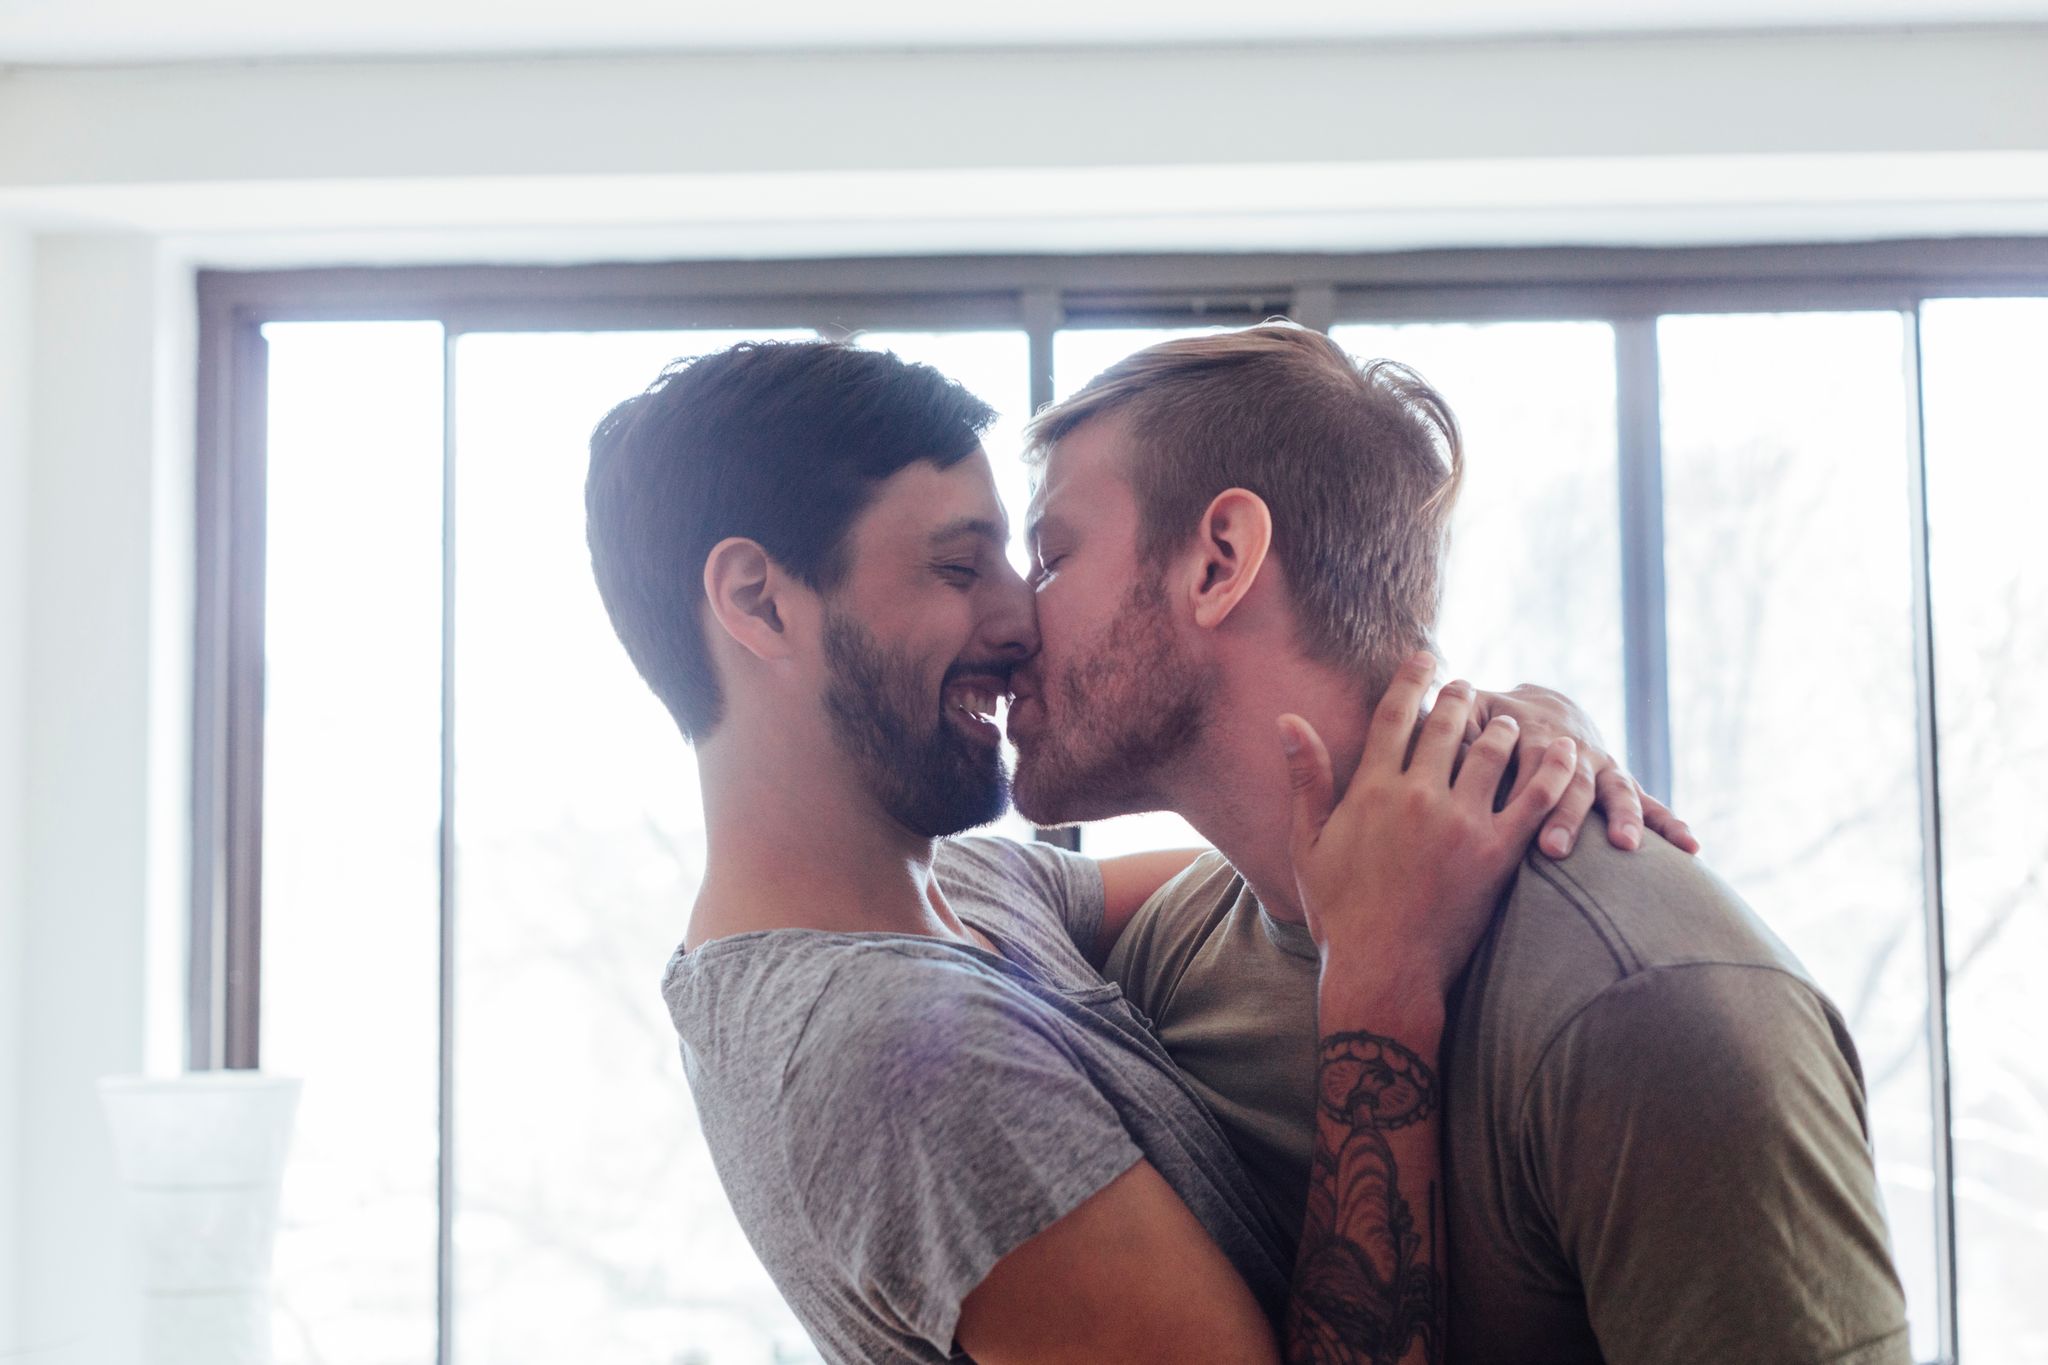 Male couple at home,fooling around, kissing and laughing